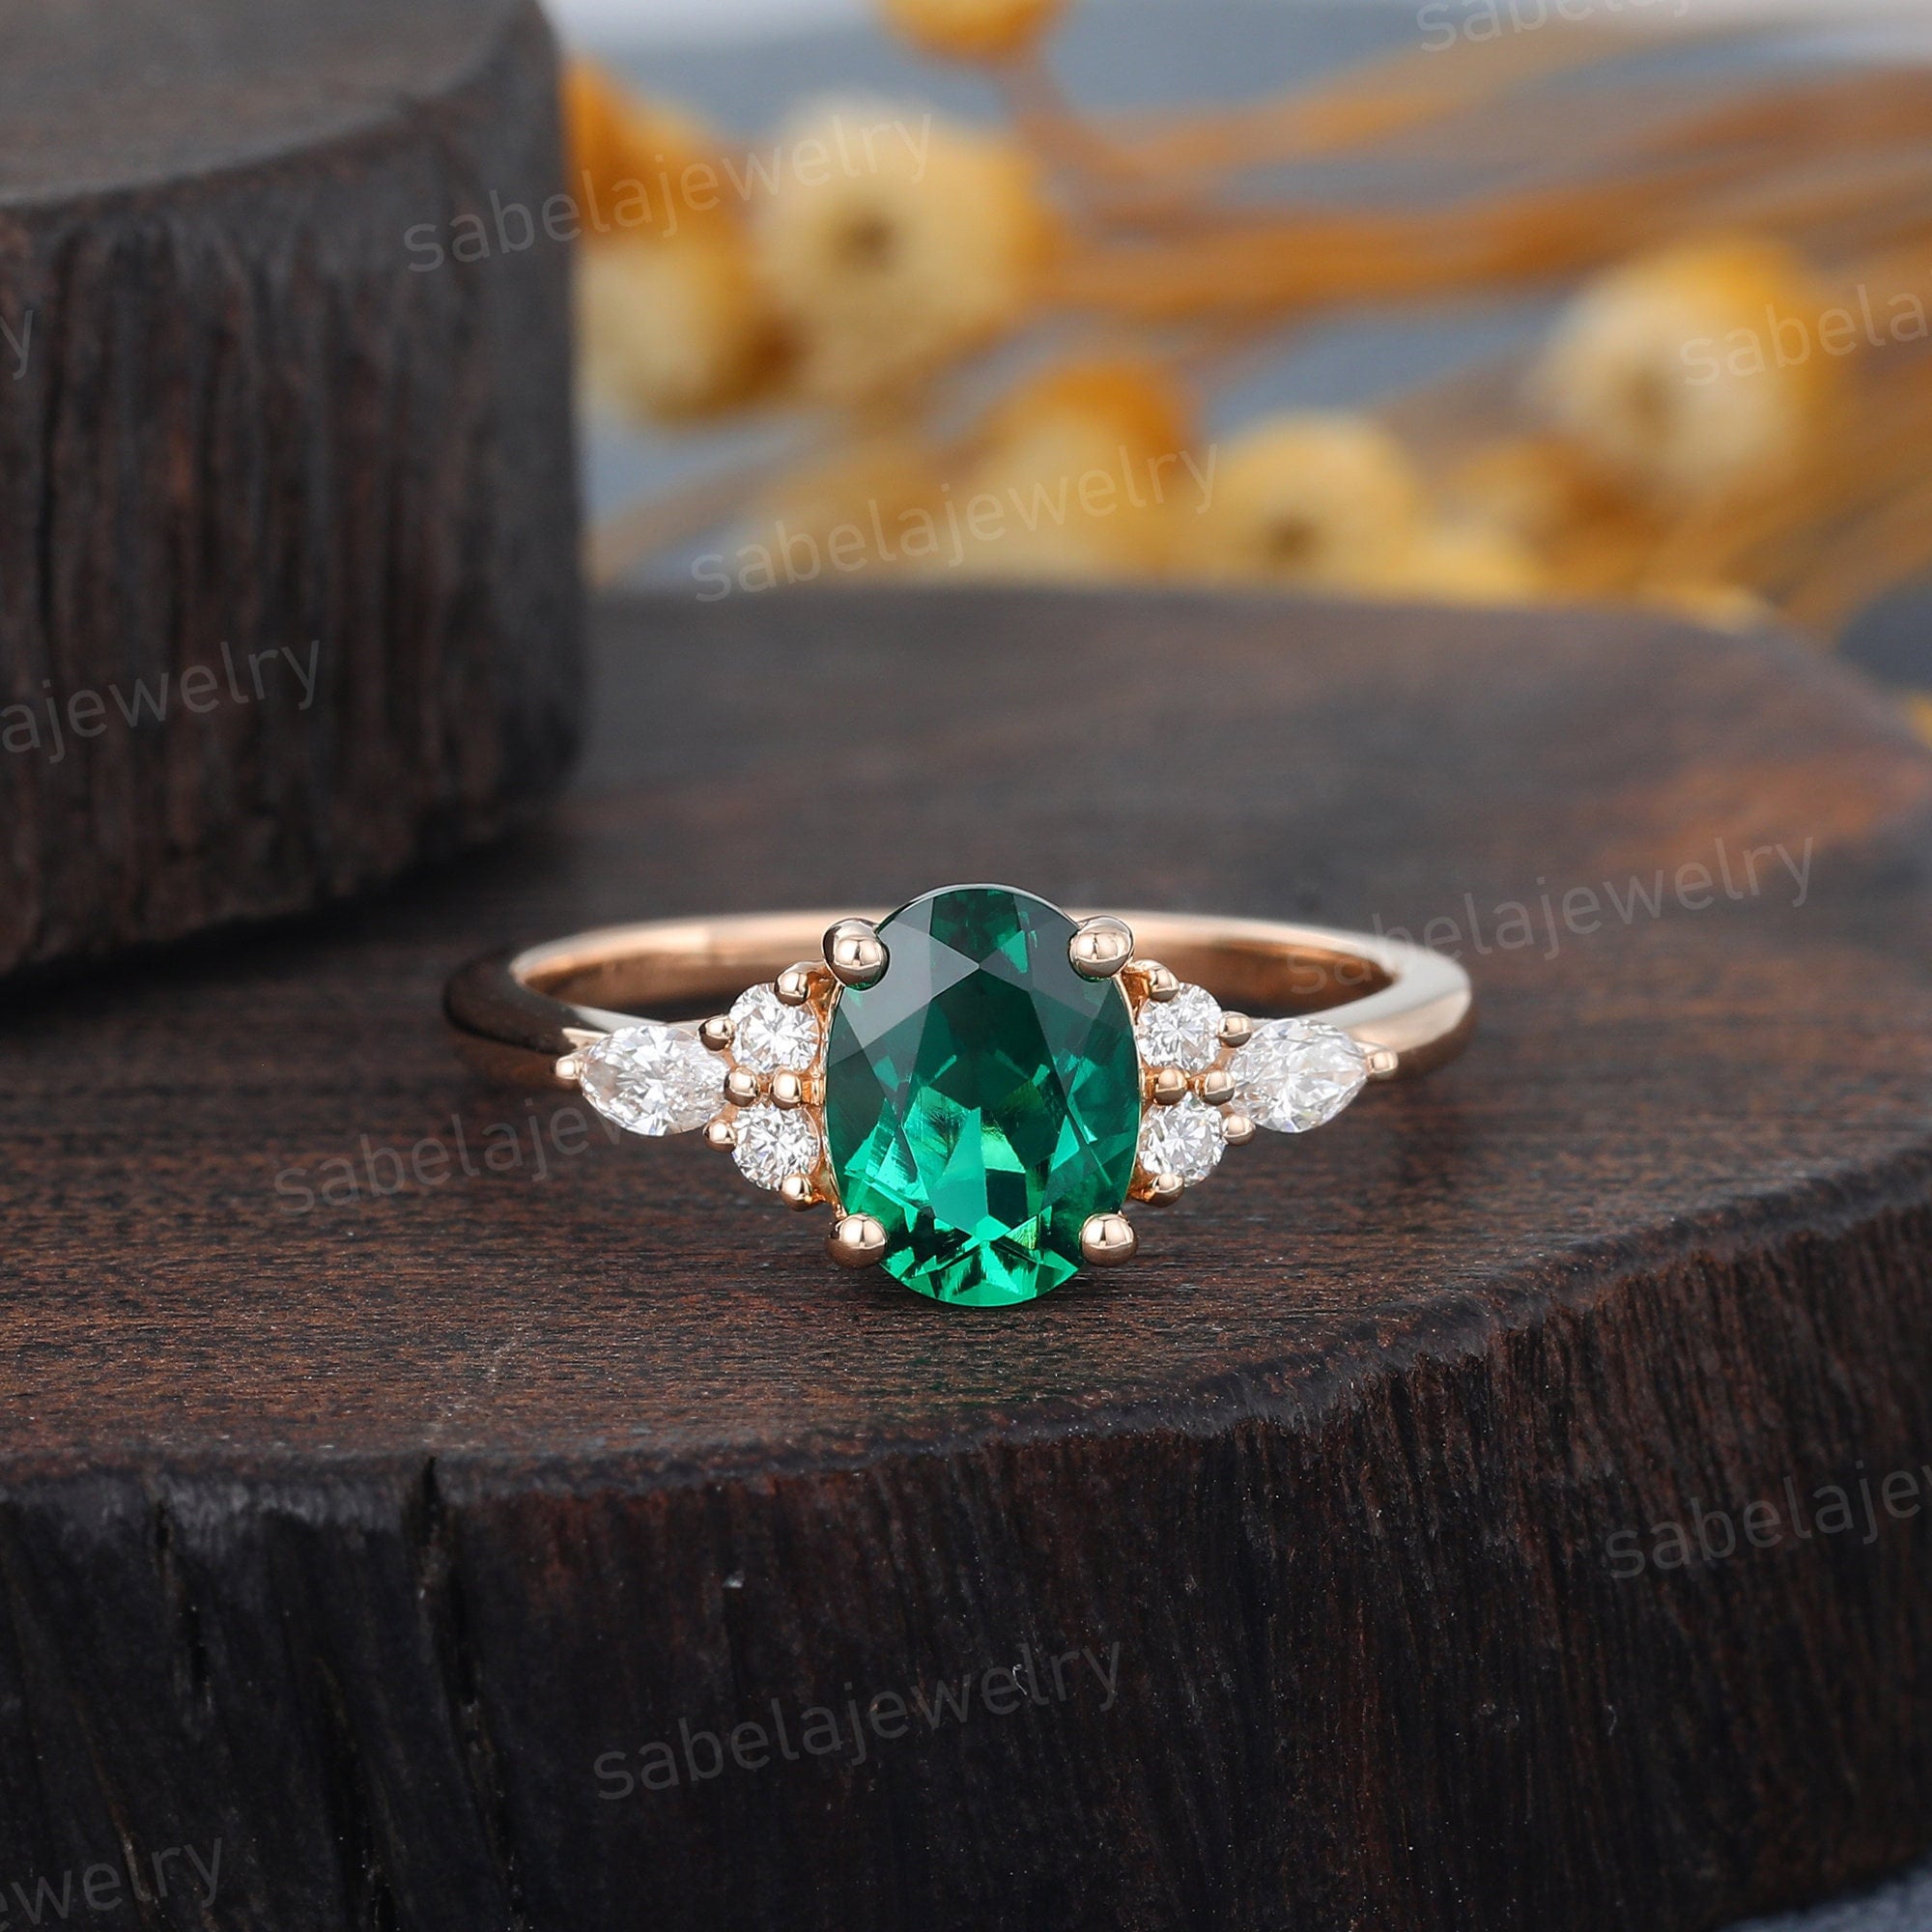 Amazing oval shaped emerald ring surrounded by cluster of diamonds.